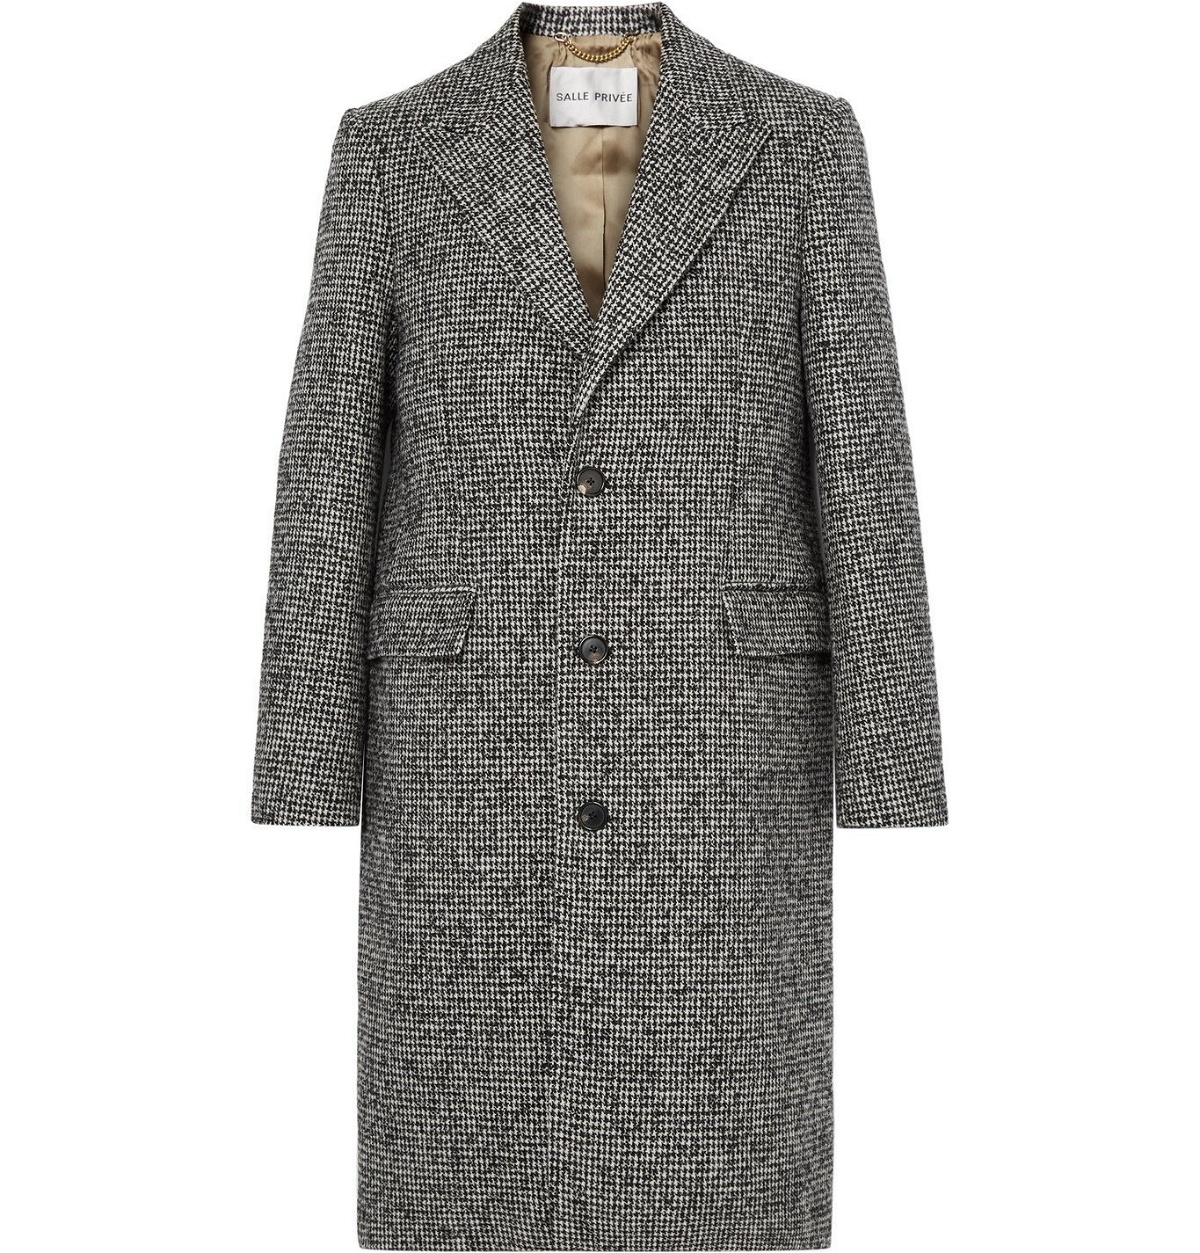 Photo: SALLE PRIVÉE - Adrian Houndstooth Wool-Blend Overcoat - Gray